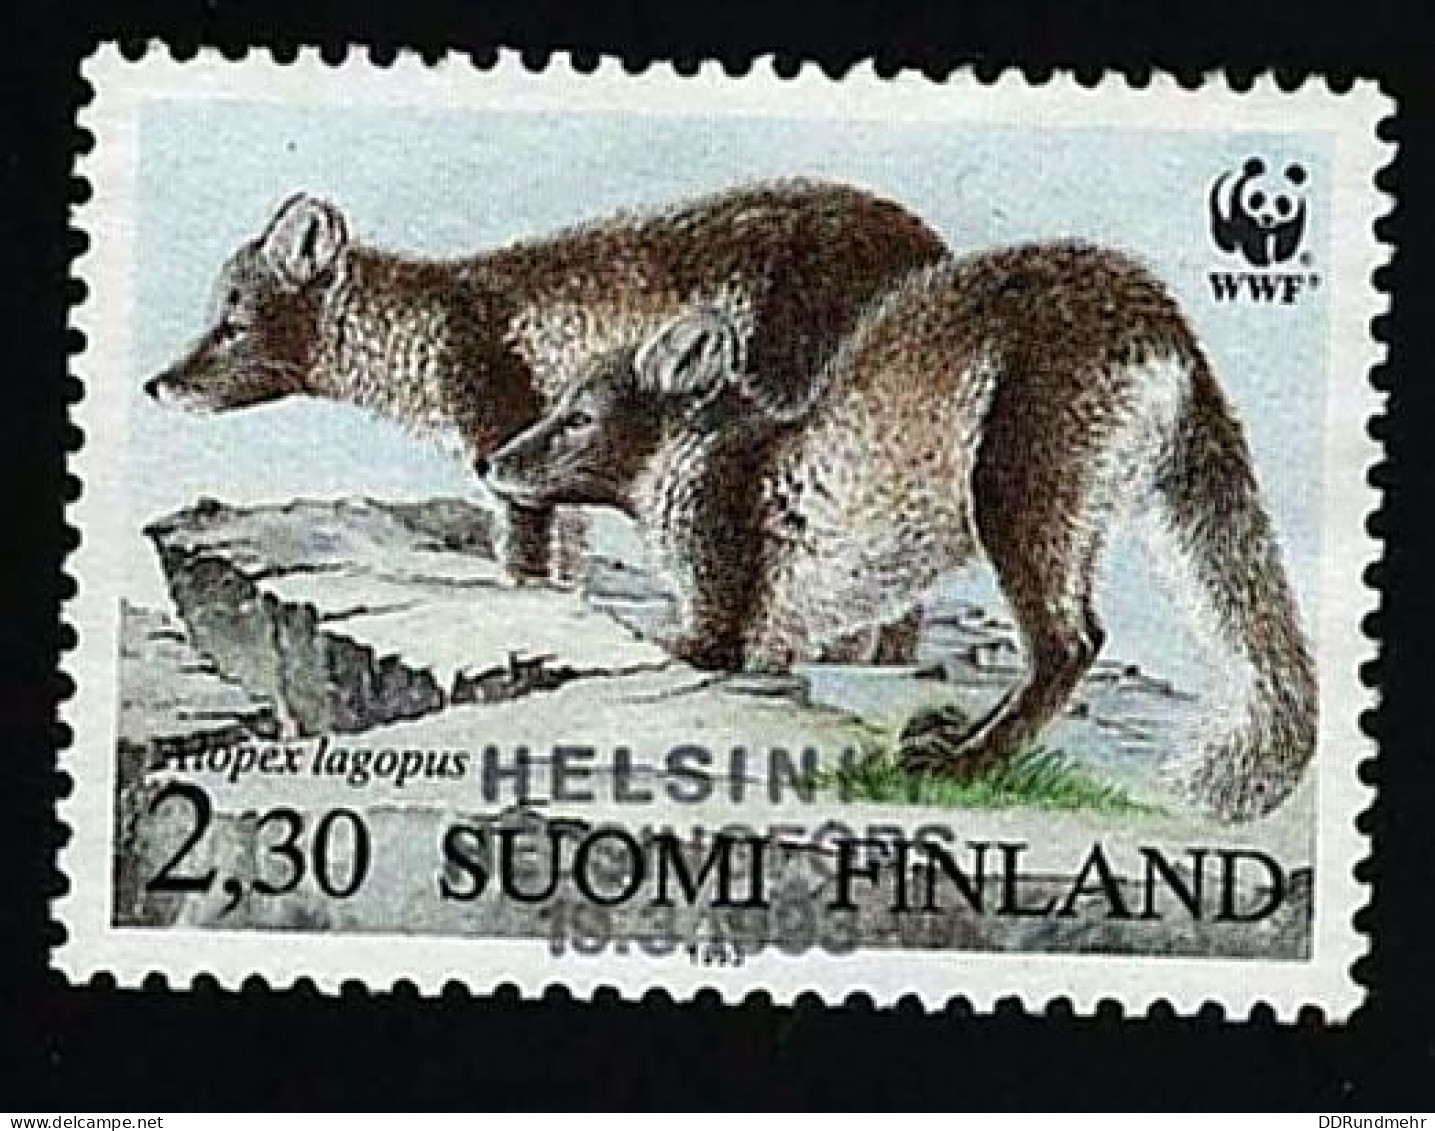 1993 Arctic Fox   Michel FI 1205 Stamp Number FI 907d Yvert Et Tellier FI 1169   First Day Stamp Used - Used Stamps